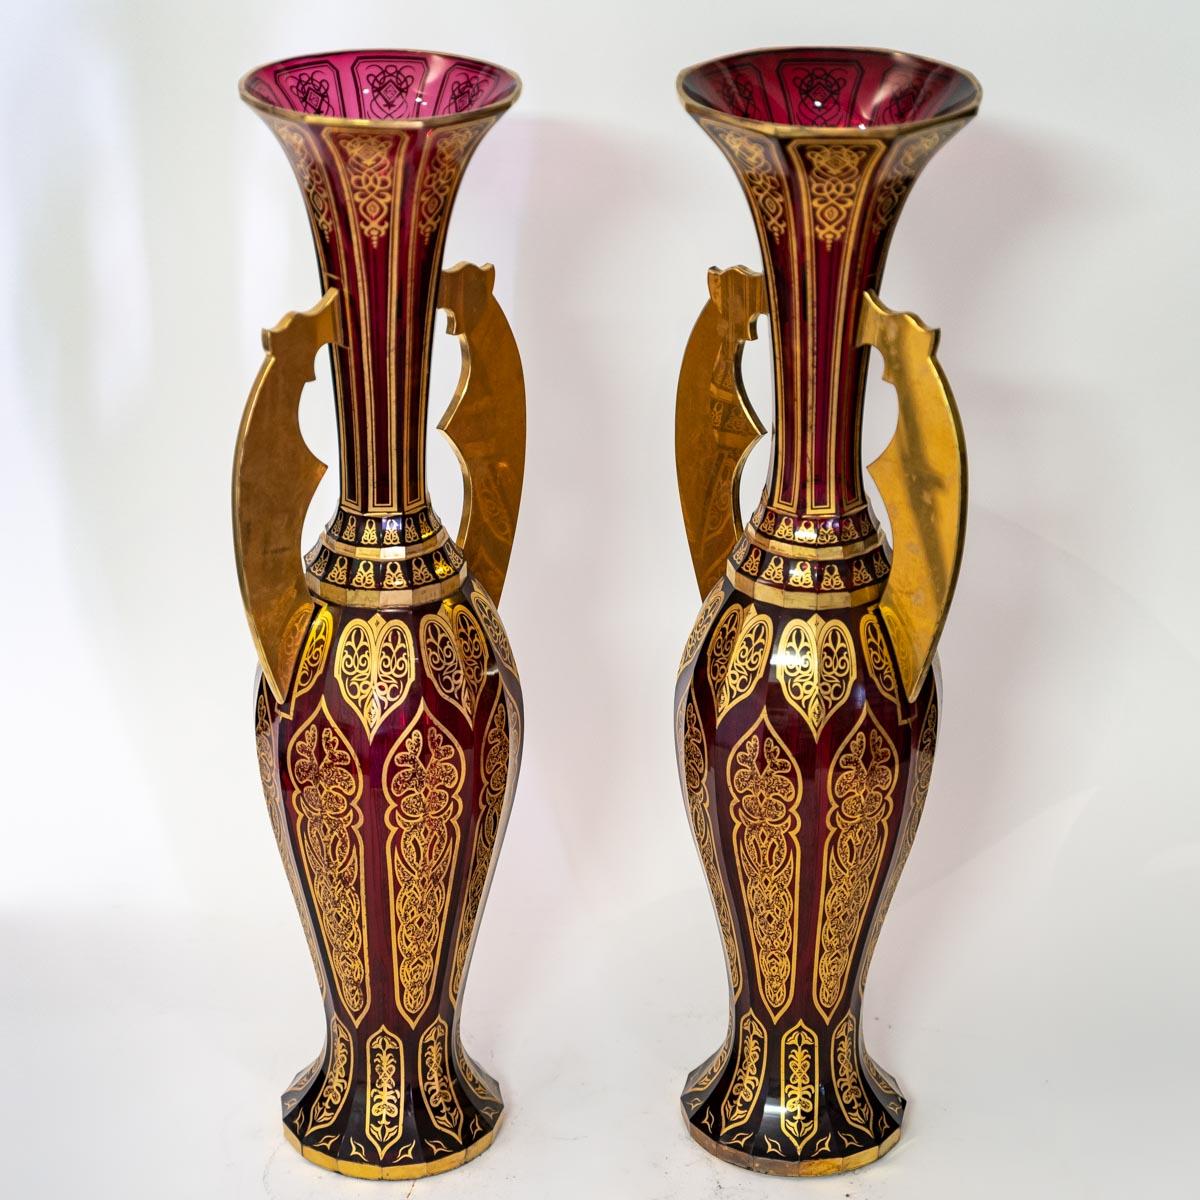 Pair of Bohemian Cut Crystal Vases in Ruby Red and Gold, 19th Century For Sale 2